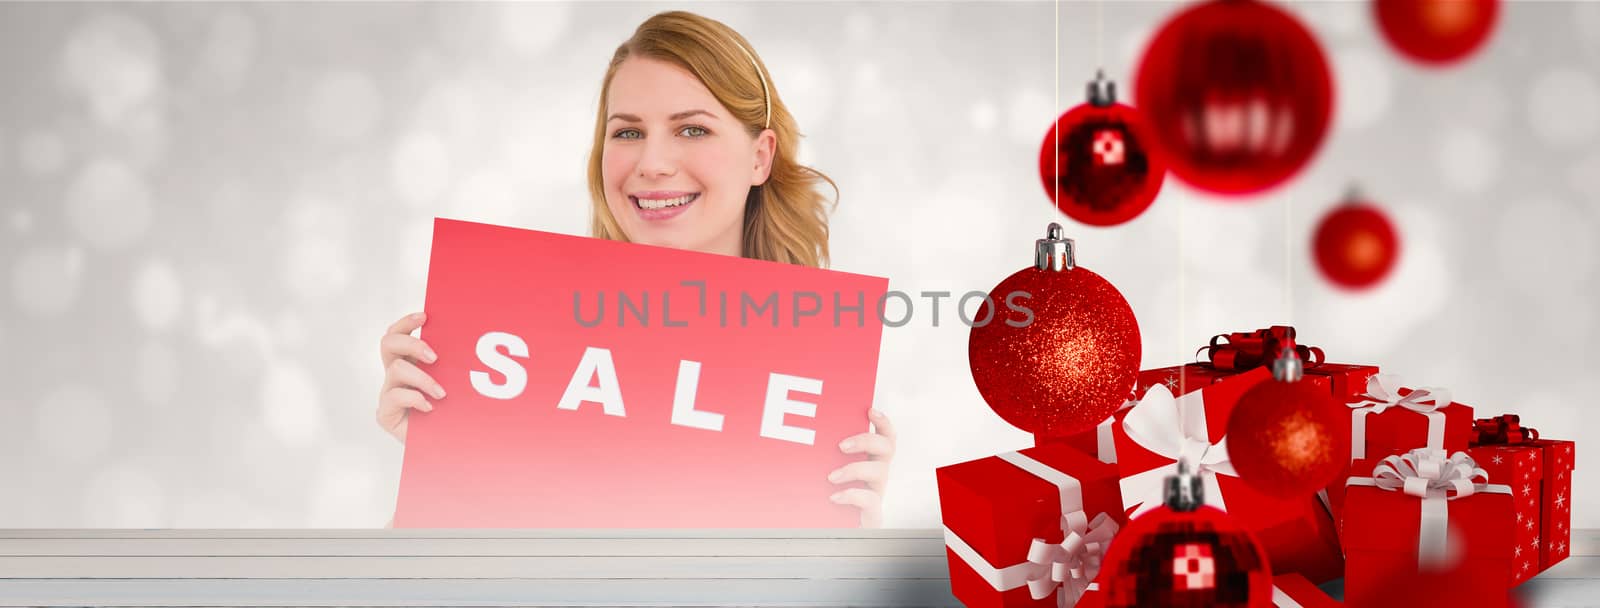 Composite image of cute blonde showing a red sale poster by Wavebreakmedia